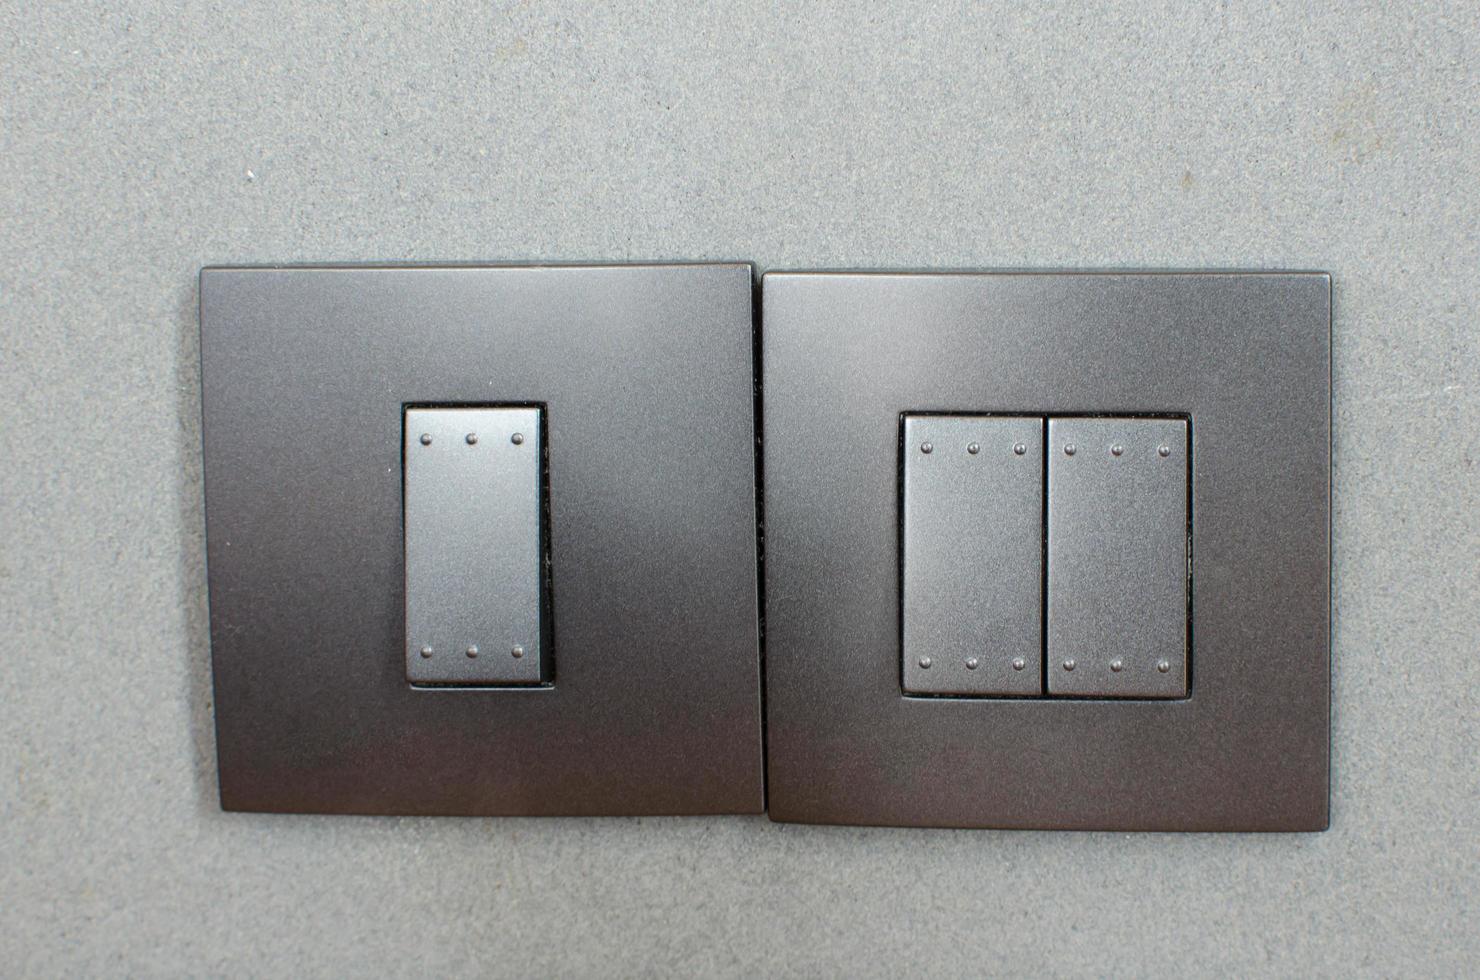 Light switches on a wall photo